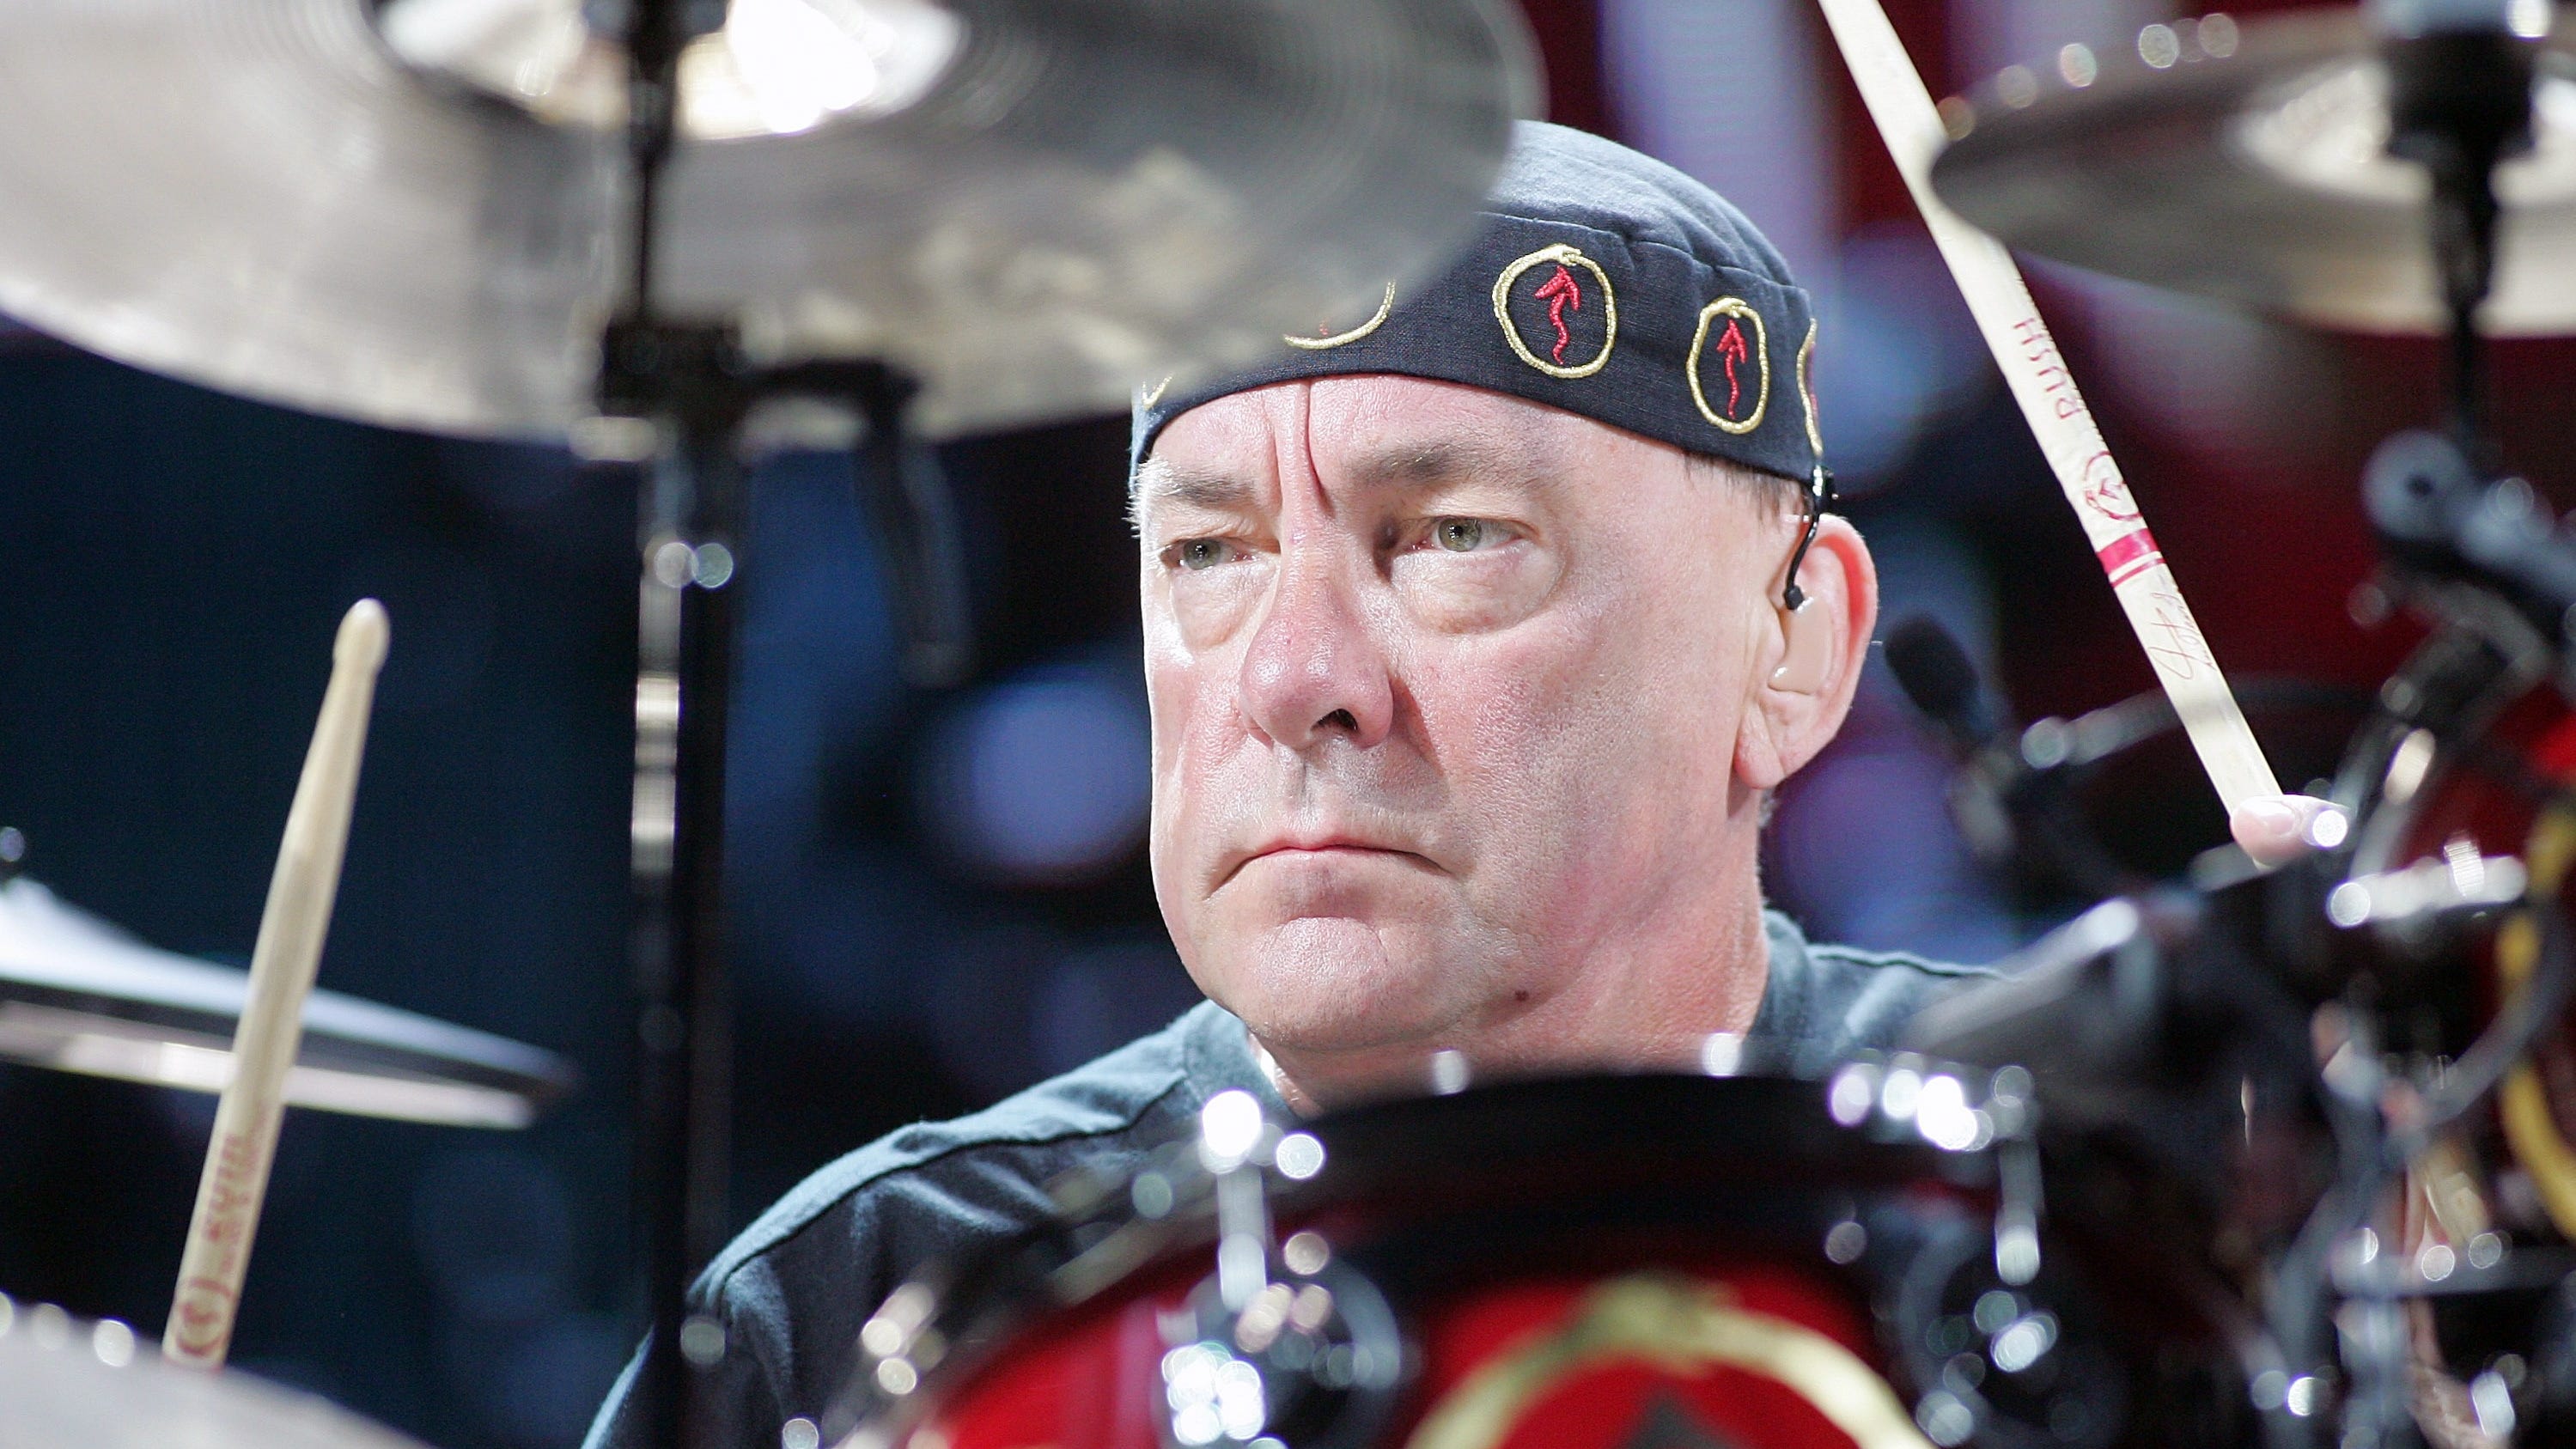 Neil Peart Of Band Rush Dead At 67 Metallicas Lars Ulrich Reacts